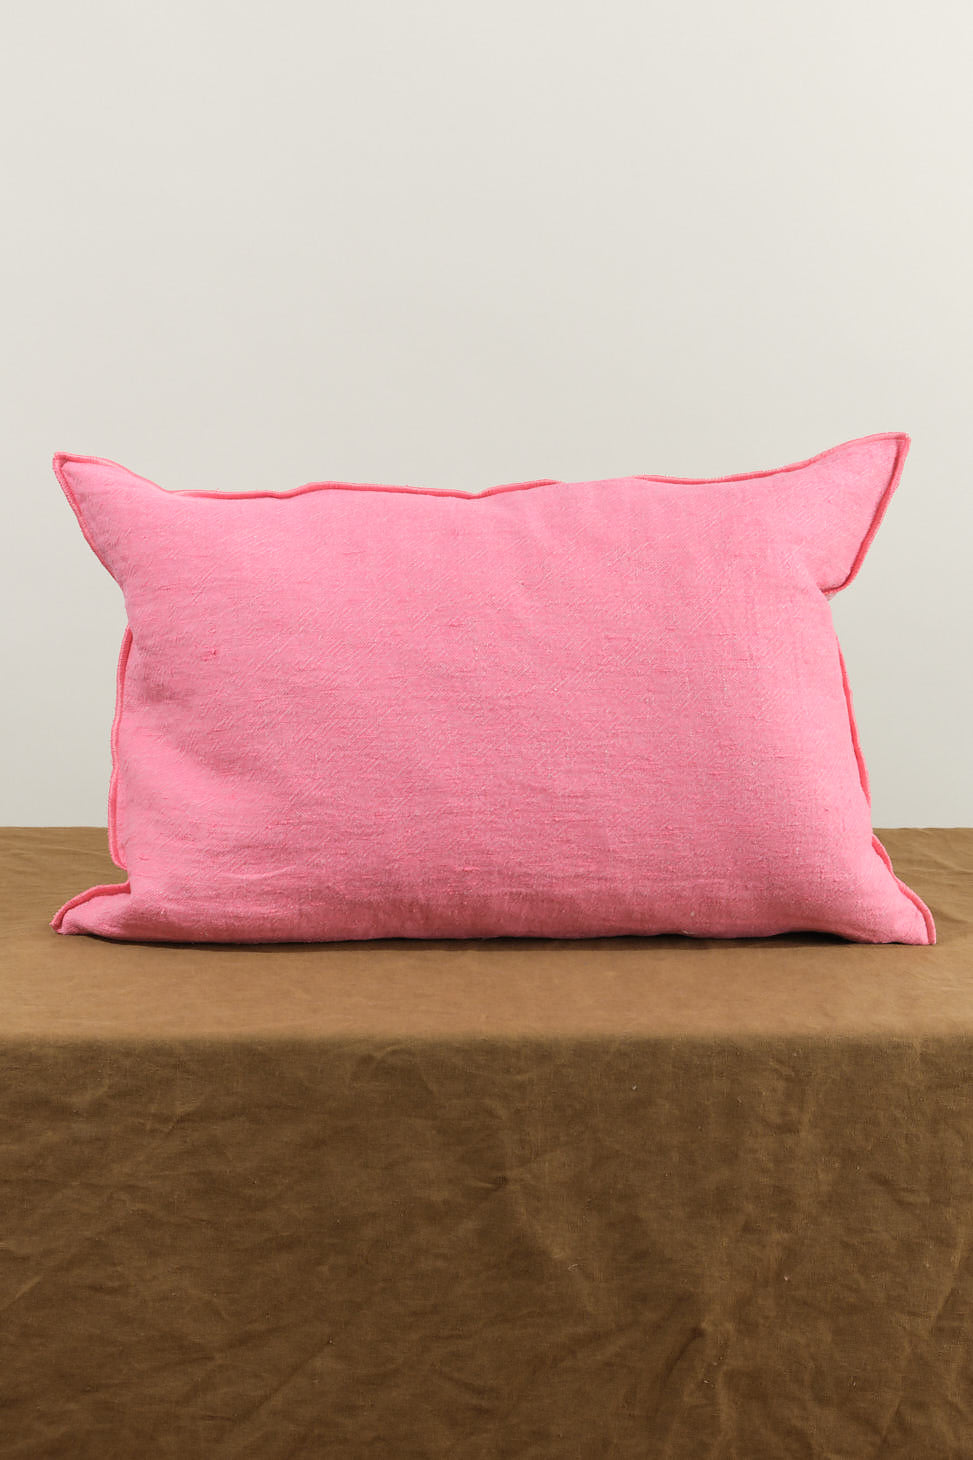 16" X 24" Washed Linen Vise Versa Cushion in Bonbon on table